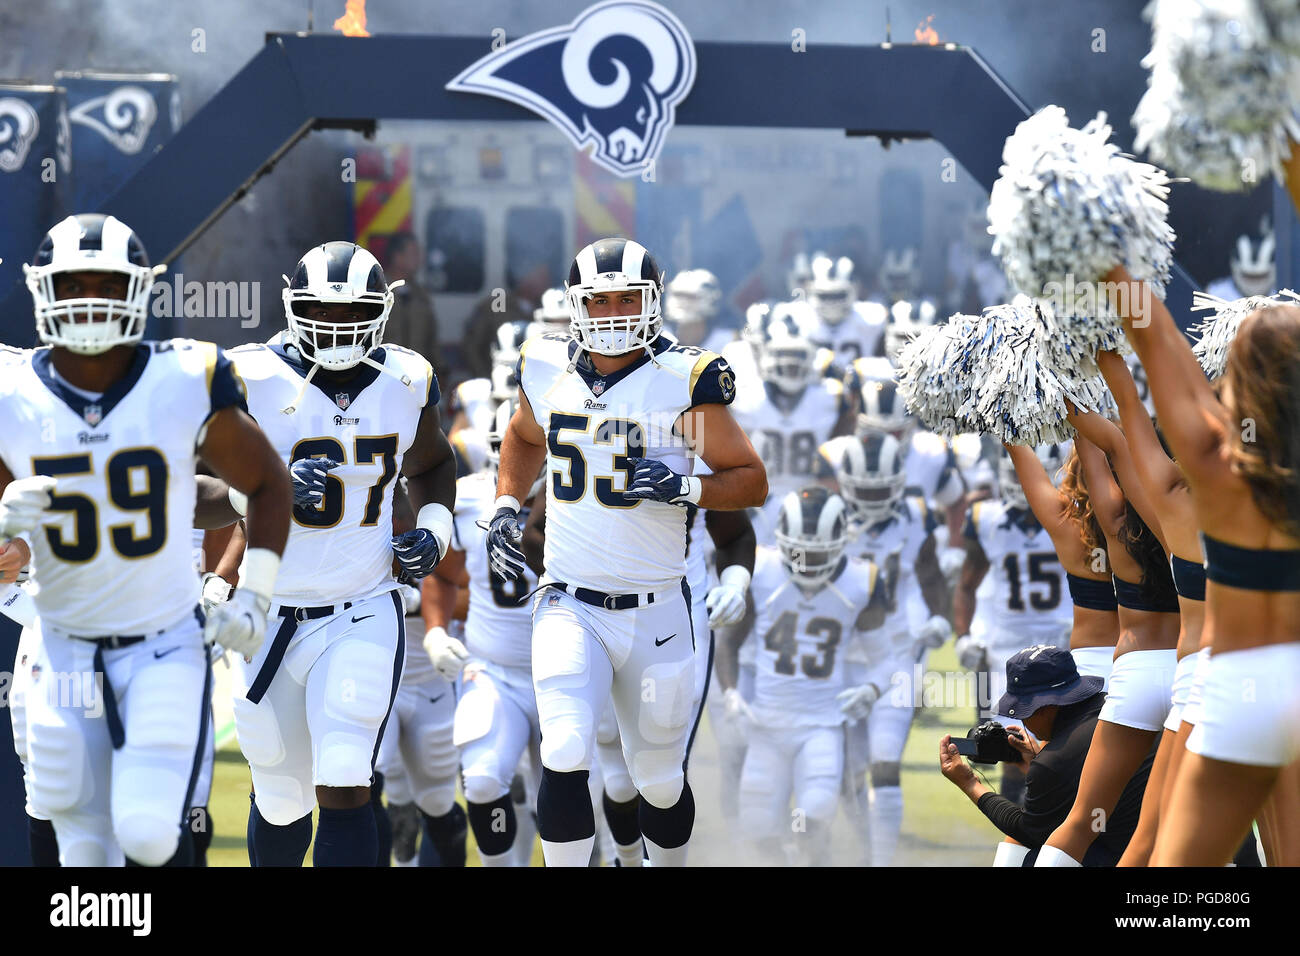 Los Angeles, USA. 25 August 2018. The Los Angeles Rams linebacker Carlos Thompson #53, Los Angeles Rams linebacker Micah Kiser #59 and Los Angeles Rams defensive tackle Chunky Clements #67 take the field before the NFL Preseason football game against the Houston Texans at the Los Angeles Memorial Coliseum in Los Angeles, California.Mandatory Photo Credit: Louis Lopez/CSM Credit: Cal Sport Media/Alamy Live News Stock Photo